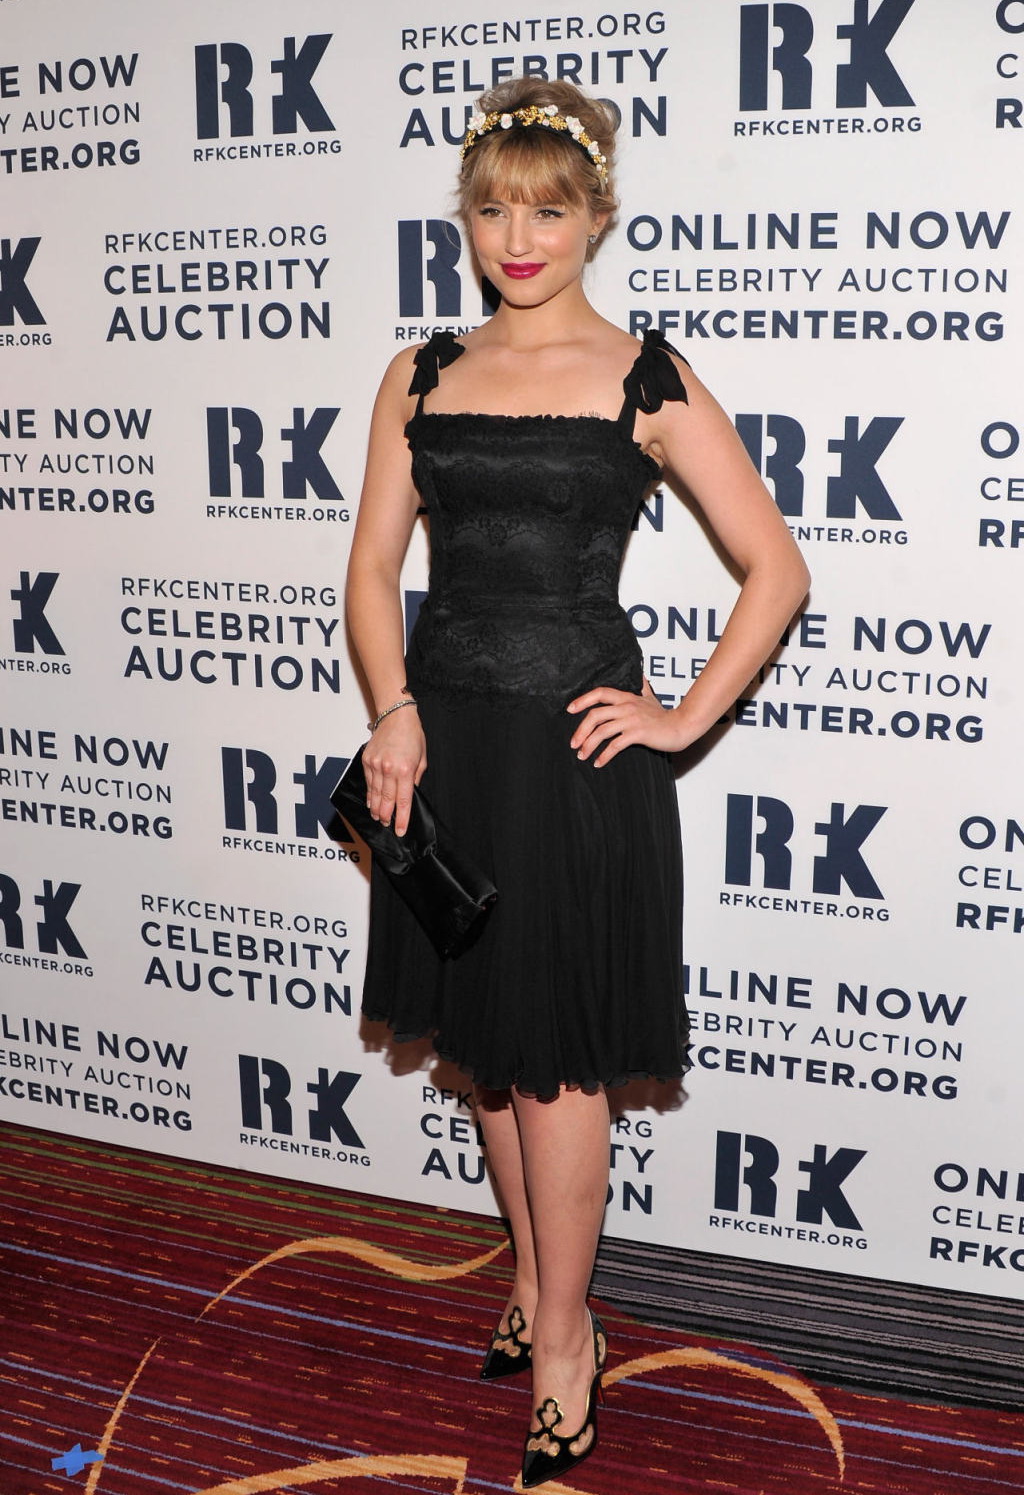 Dianna Agron - In Dress at Ripple Of Hope 2012 Gala in New York